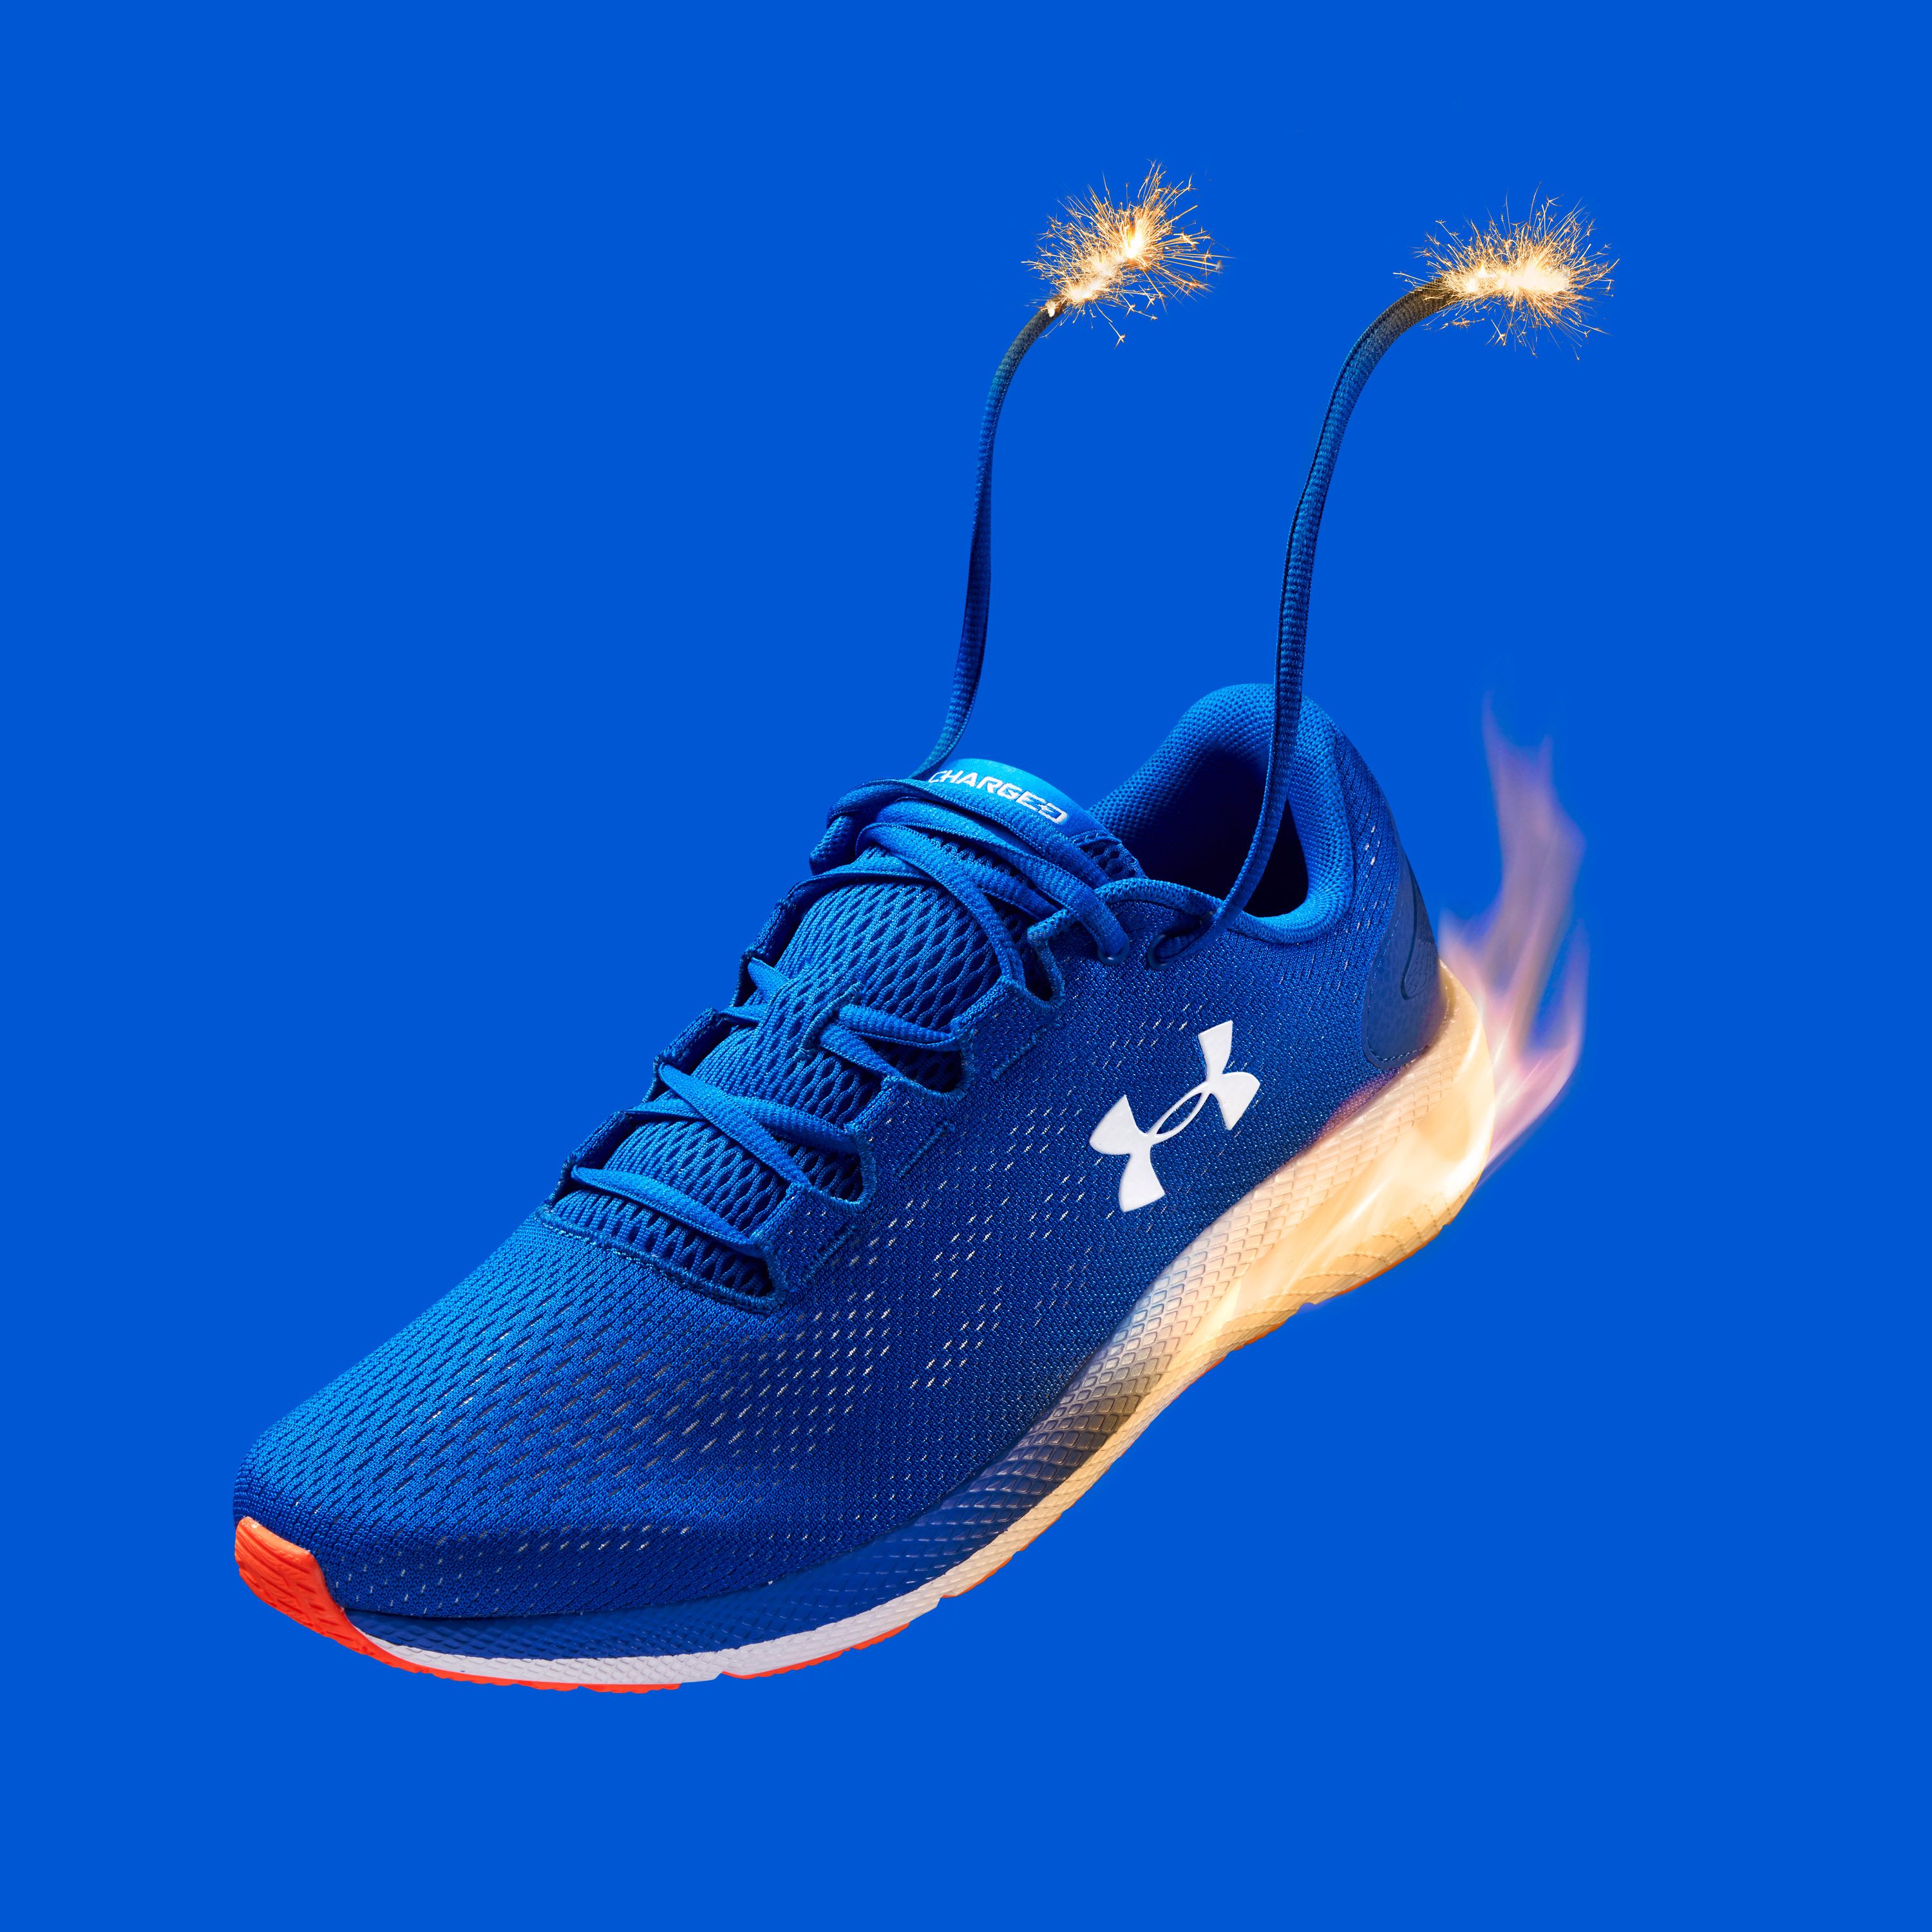 WEB_Tennis-Shoes-and-Flames-copy.jpg